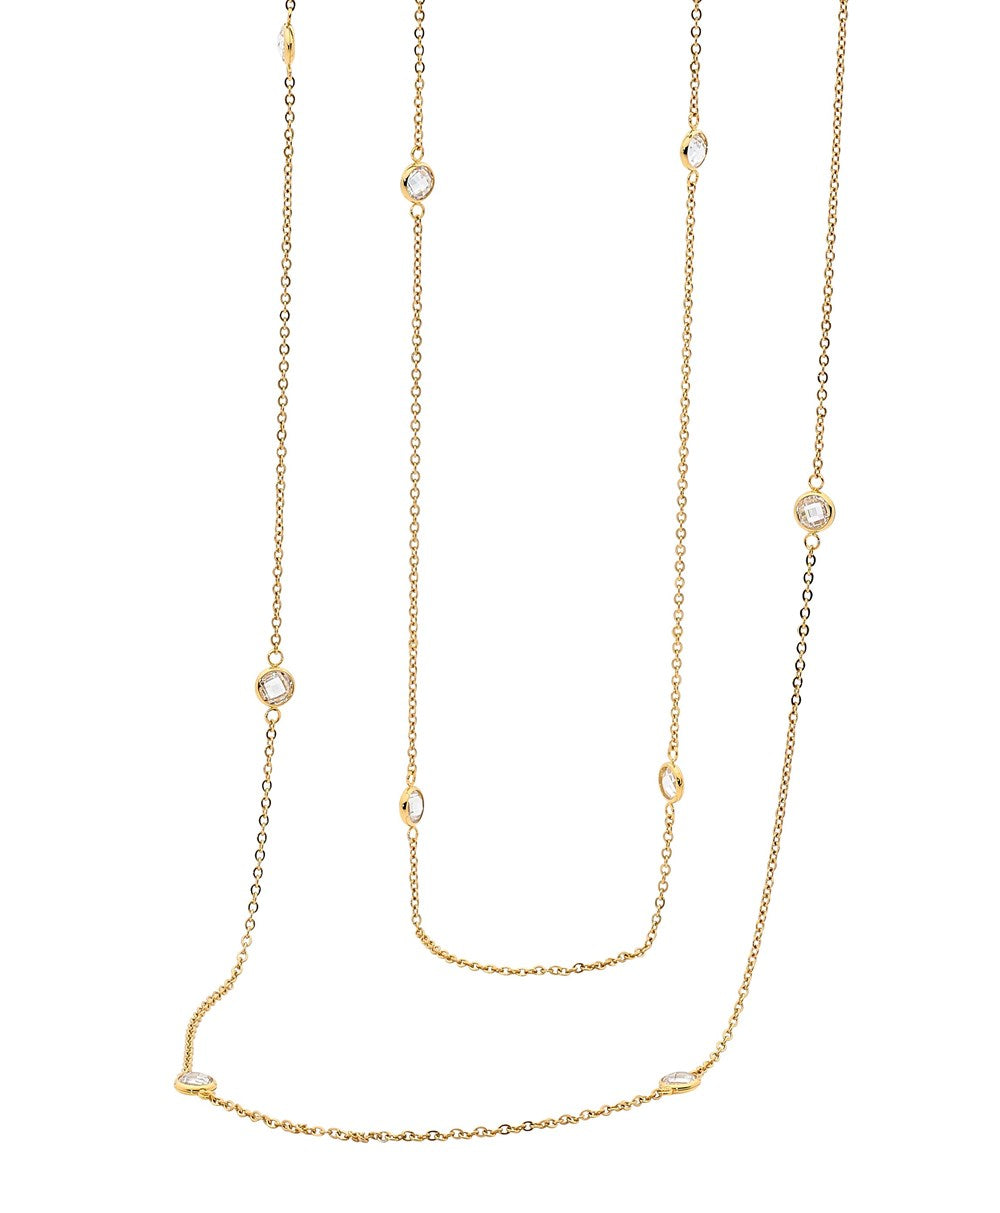 Extra Long Fine Yellow Gold Chain with 9 Scattered Cubic Zirconais.